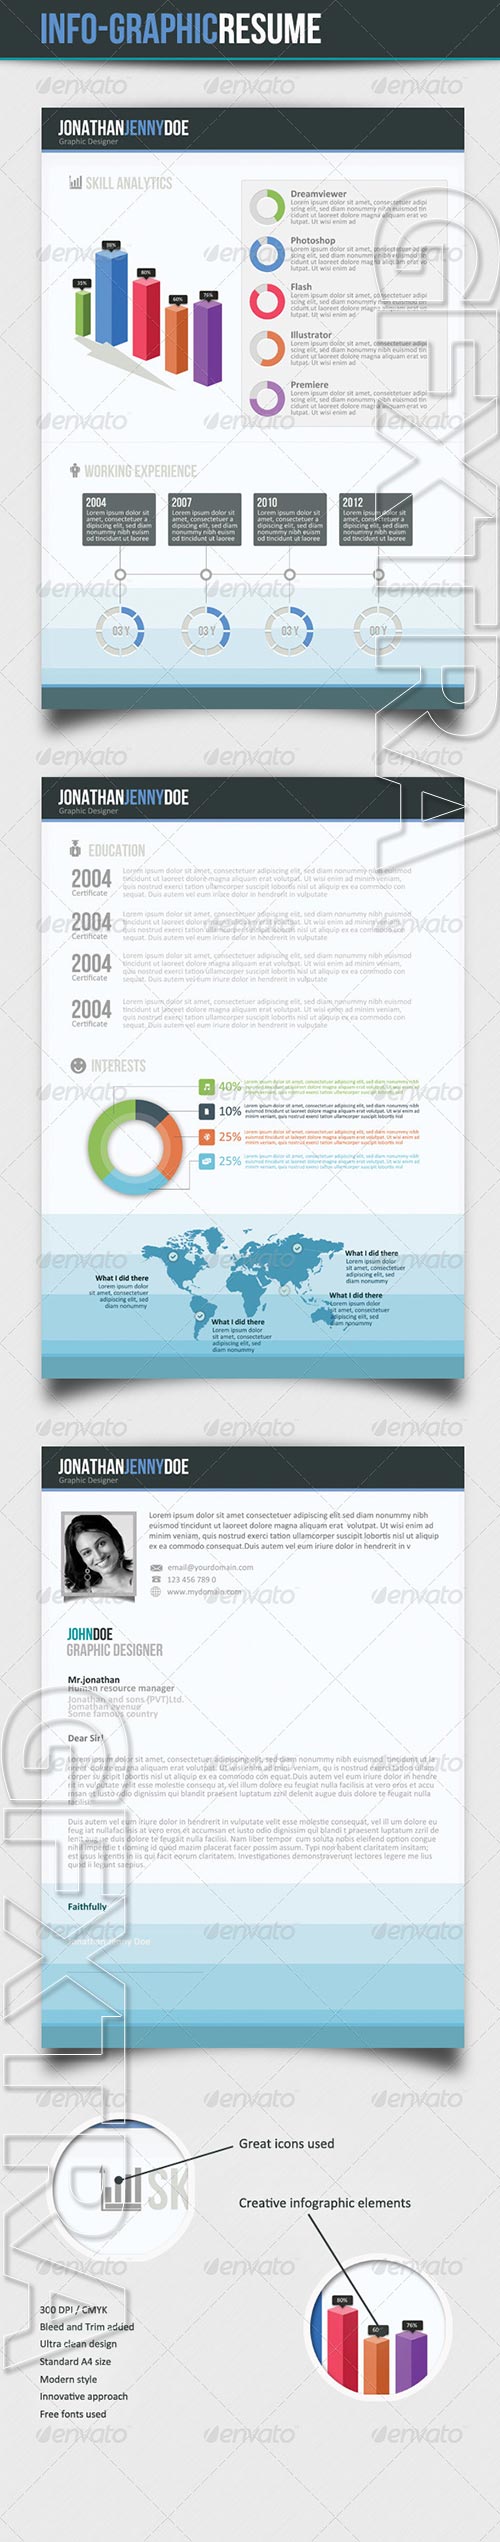 GraphicRiver - Infographic 3Page Resume